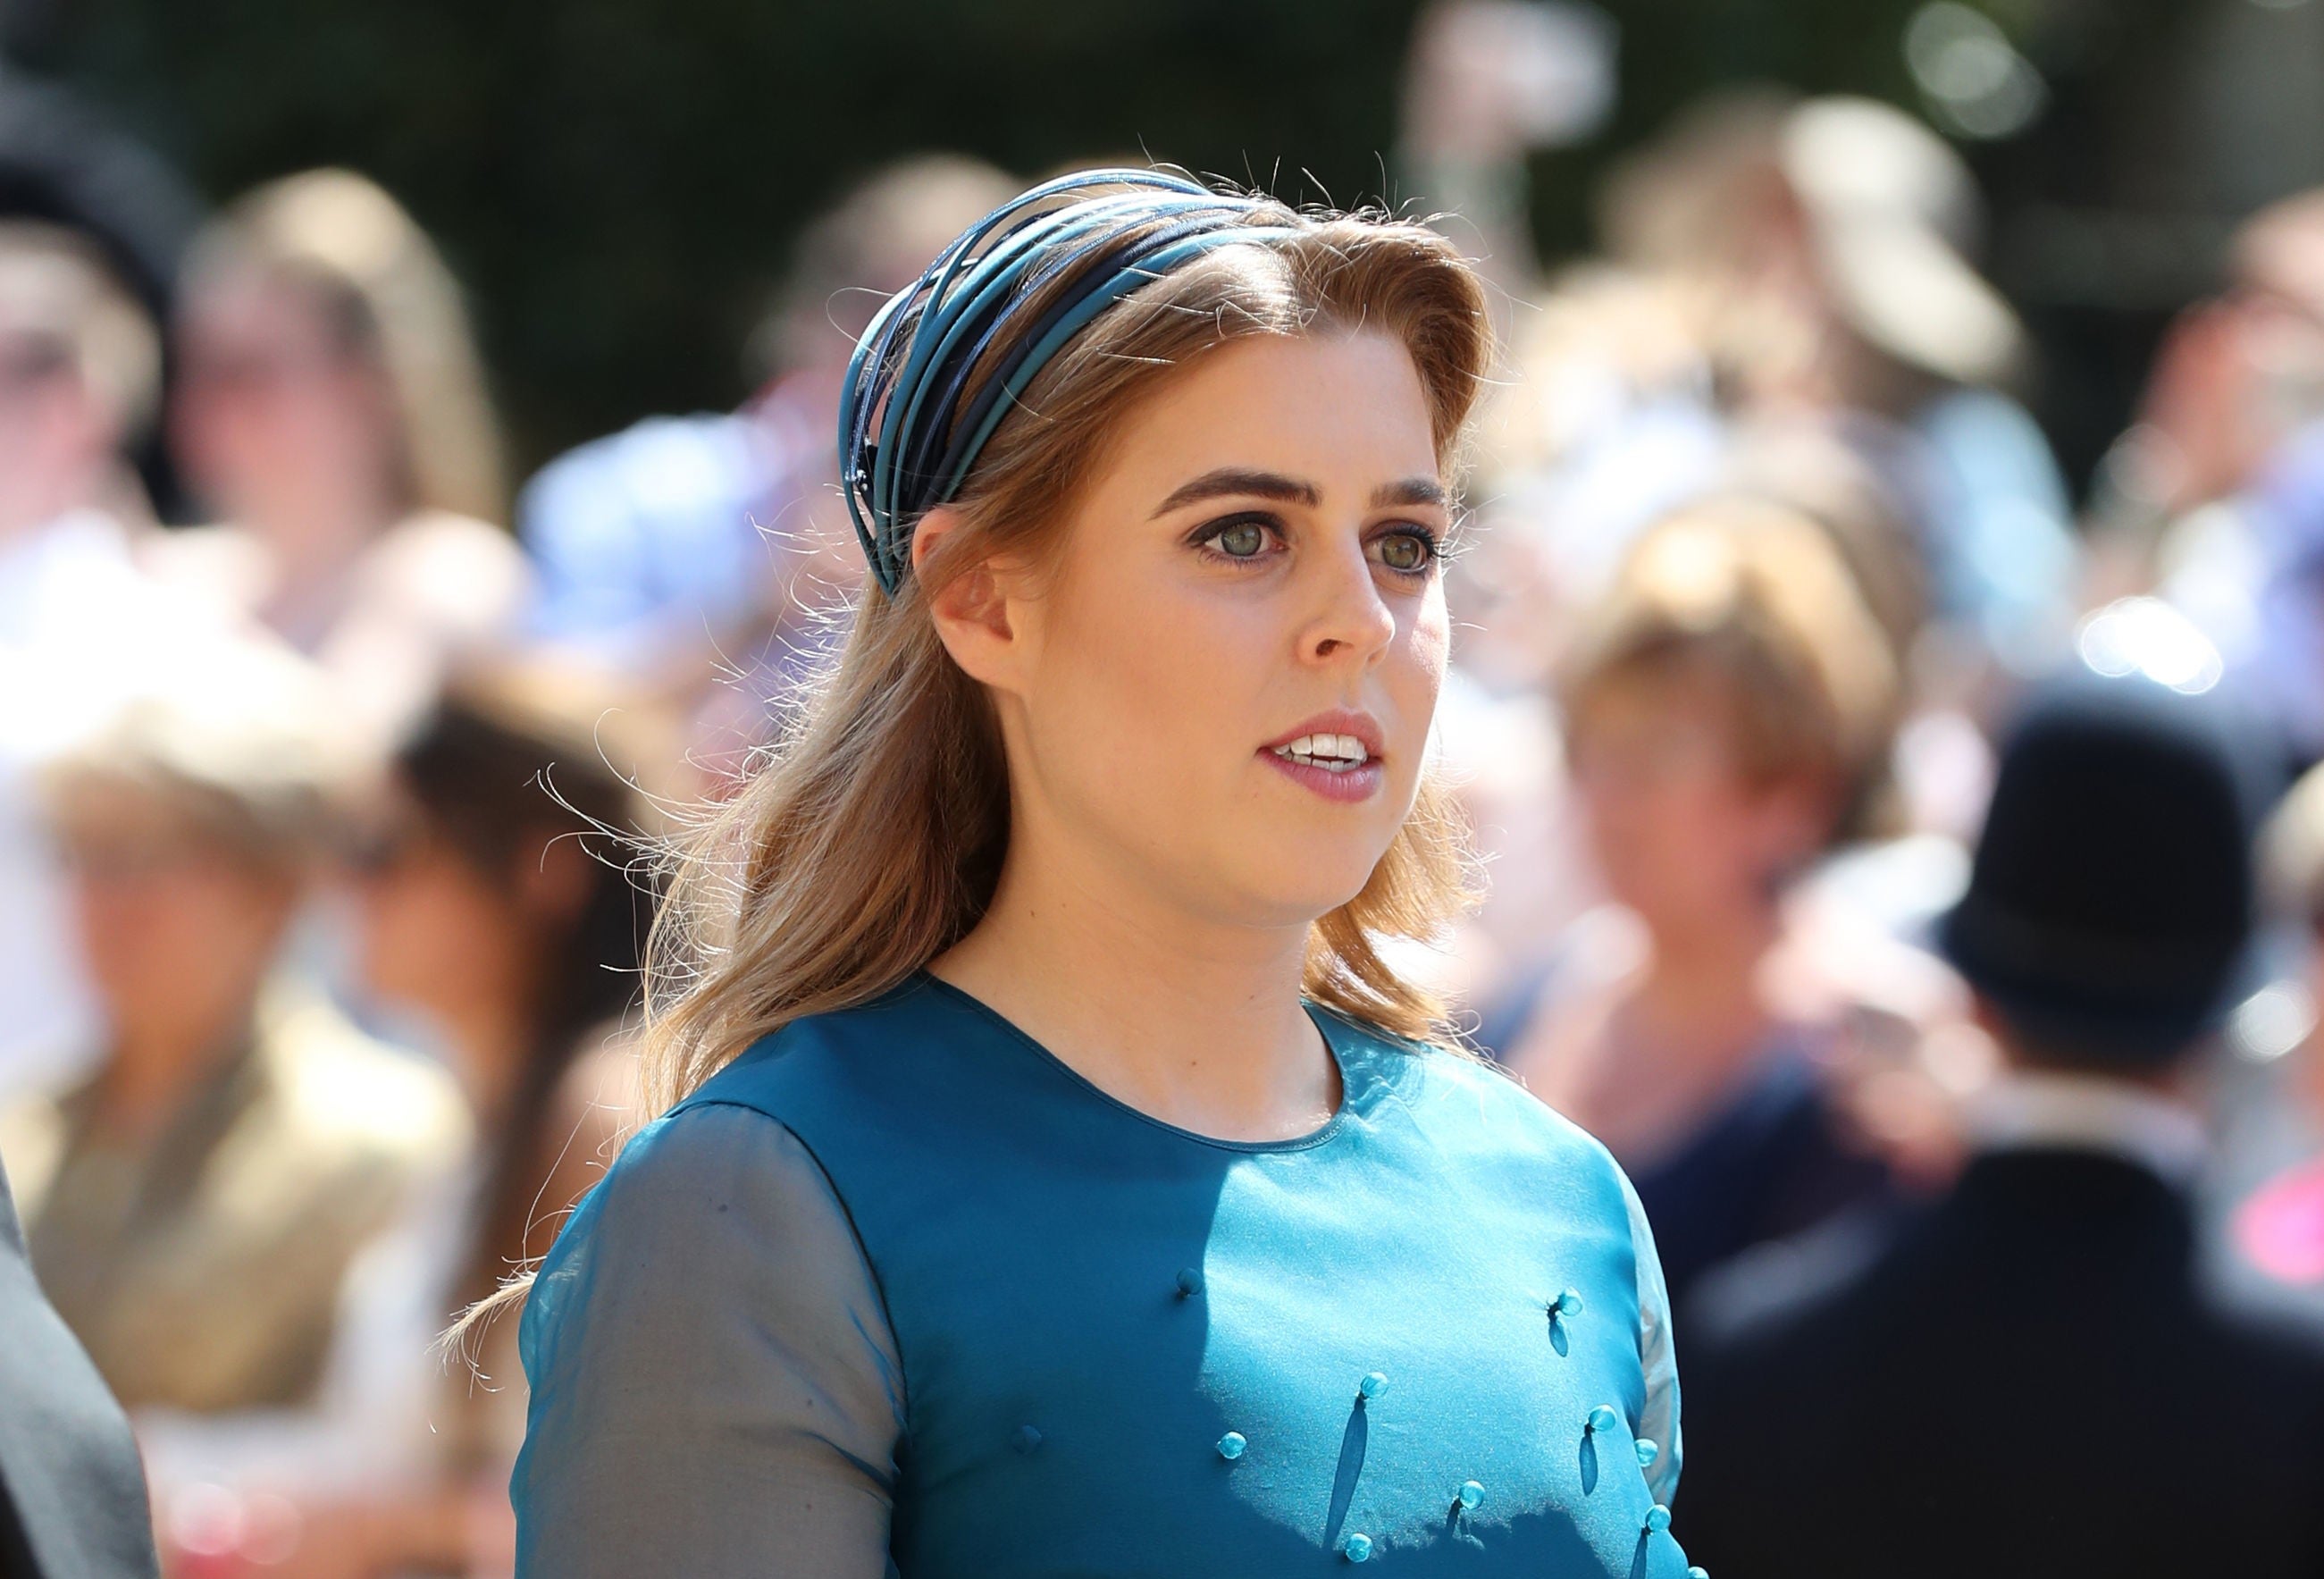 Princess Beatrice arrives at St George’s Chapel at Windsor Castle before the wedding of Prince Harry to Meghan Markle on May 19, 2018